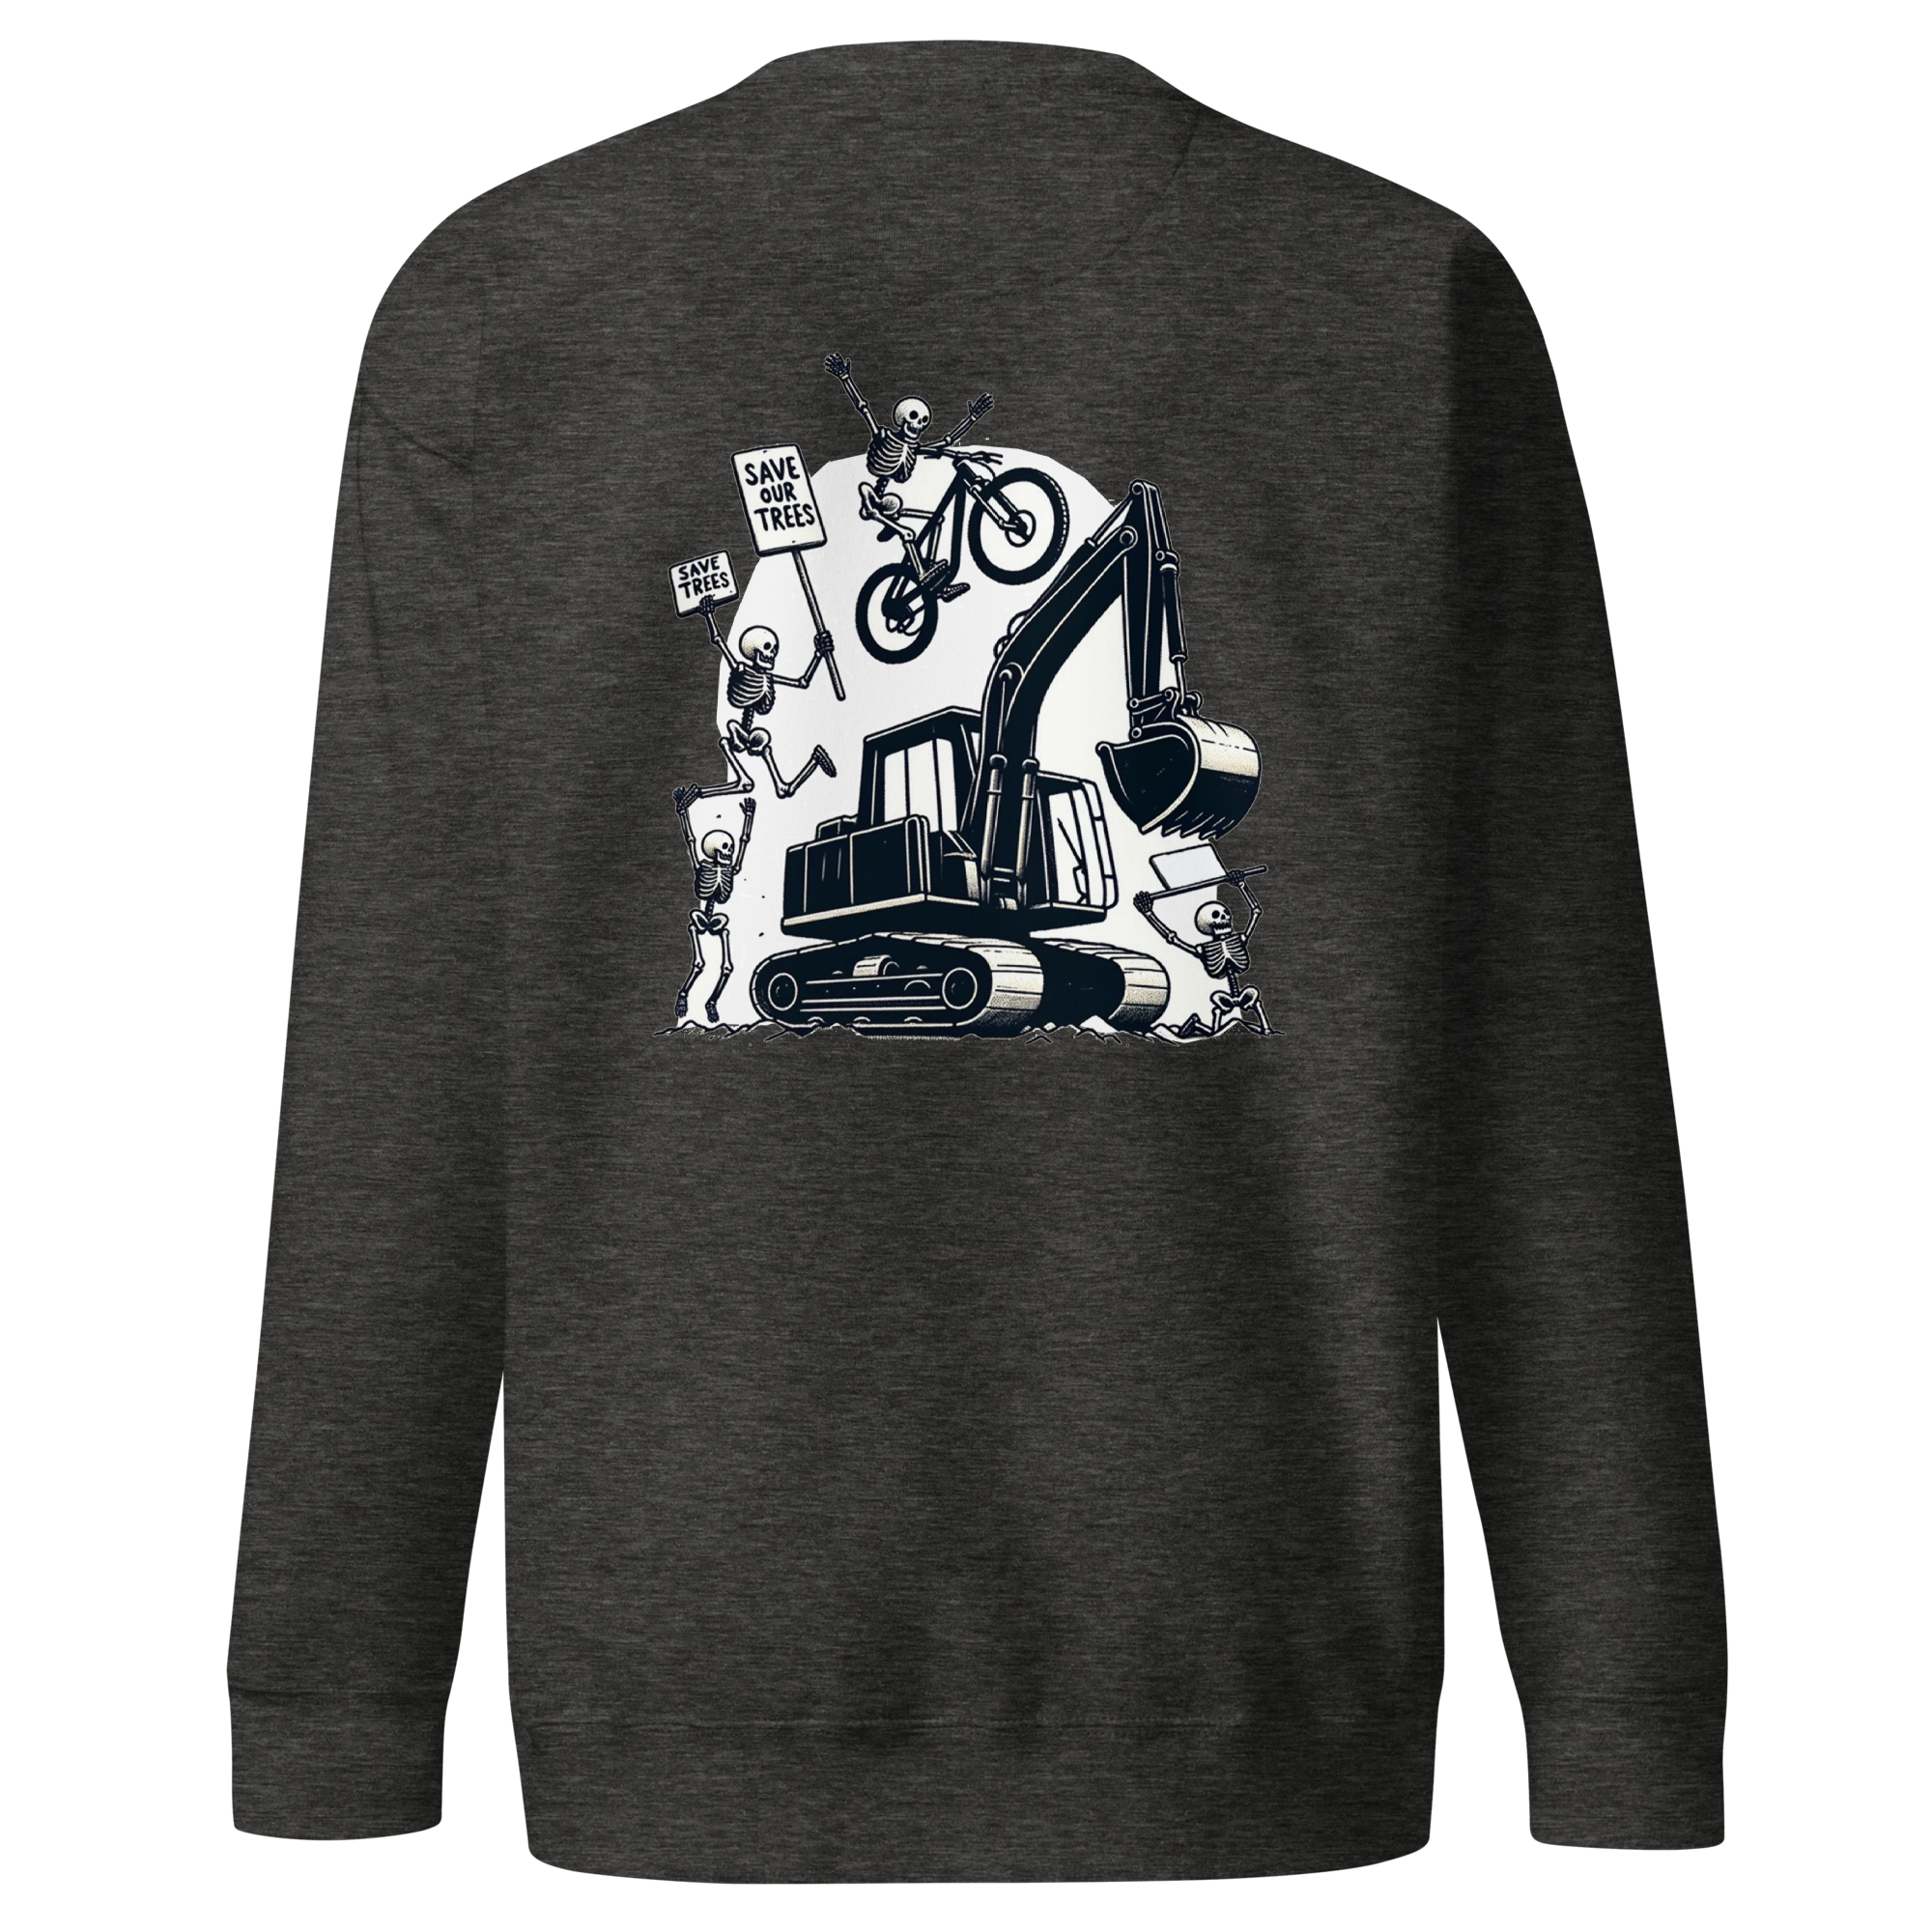 Save our Trees Excavator - Sweater